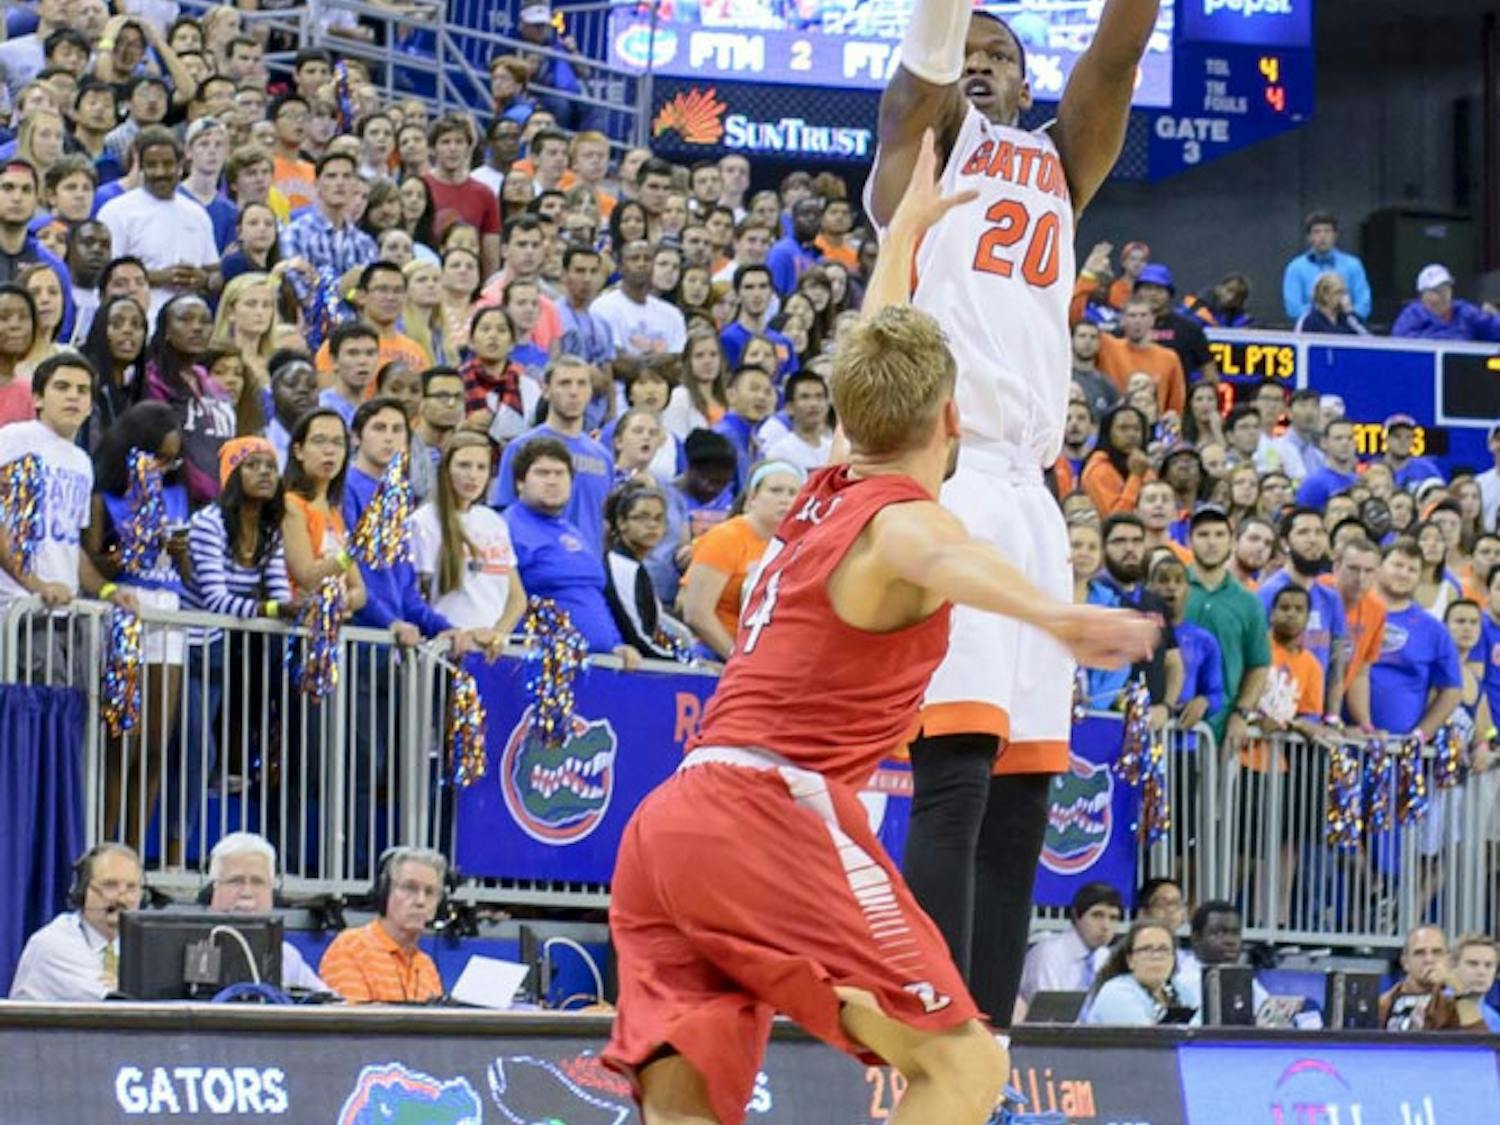 Michael Frazier II attempts a three-point shot during Florida's 79-70 exhibition win against Barry on Nov. 6.